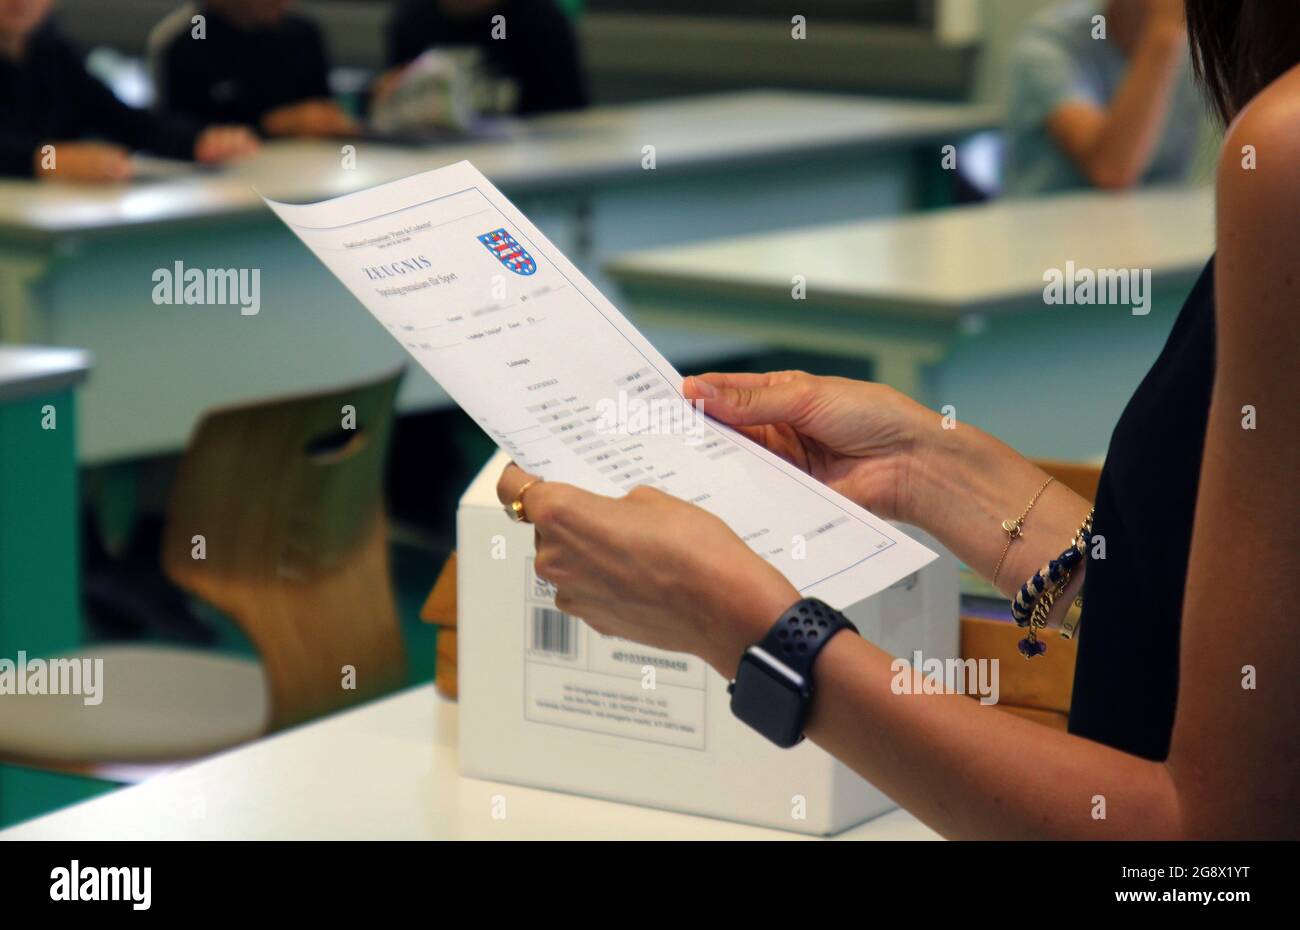 Erfurt, Germany. 23rd July, 2021. A teacher at a high school stands in a classroom on the last day of school before summer vacation, report card in hand. Credit: Martin Wichmann/dpa - ATTENTION: Names on certificates pixelated for legal reasons/dpa/Alamy Live News Stock Photo